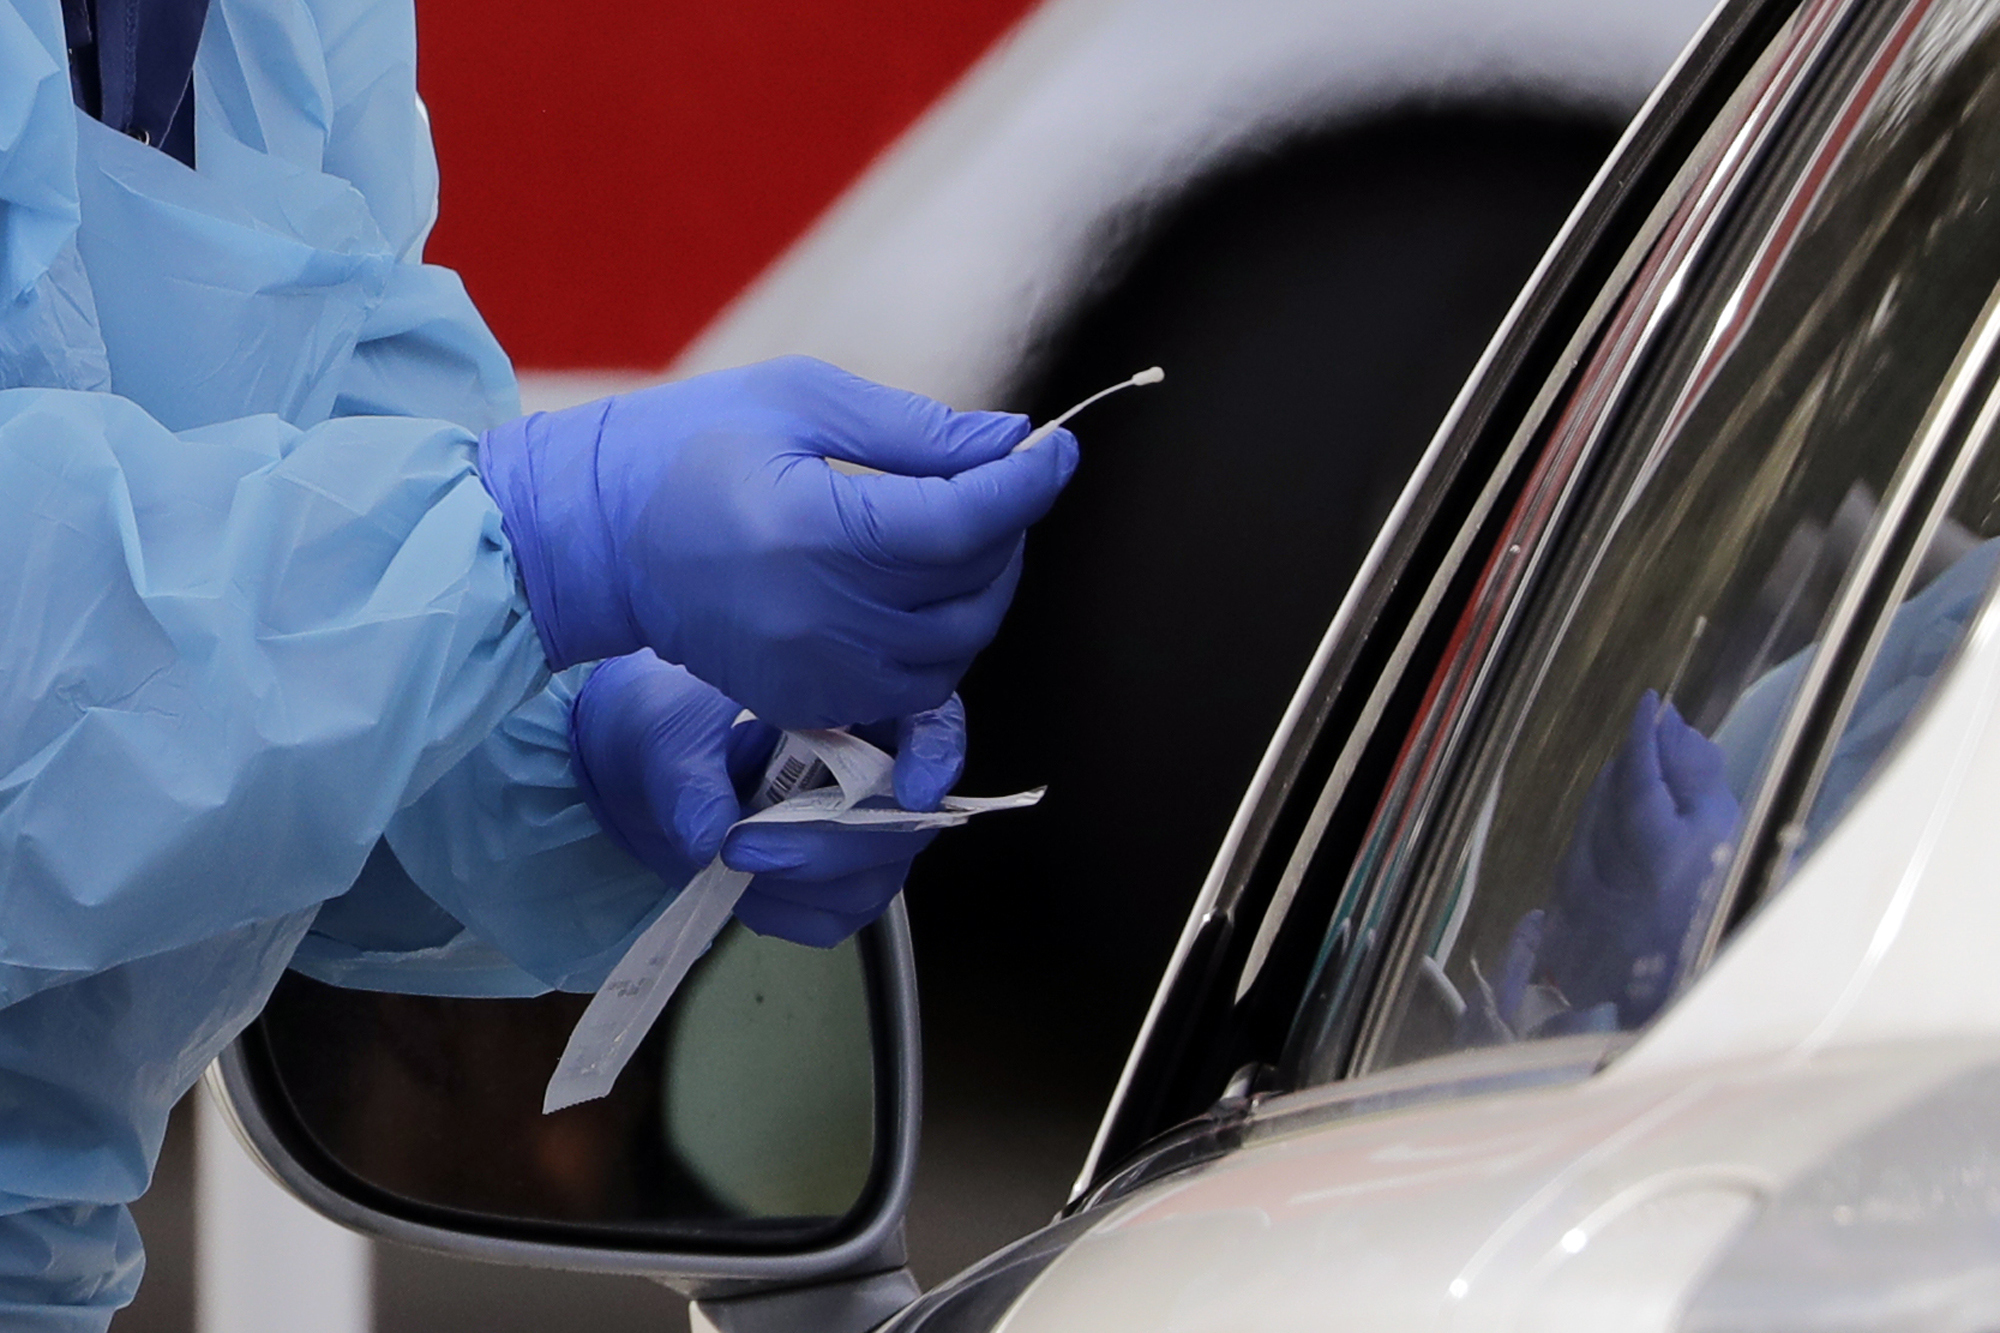 Nurse completes taking a nasopharyngeal swab from a patient at a drive-through COVID-19 testing station f